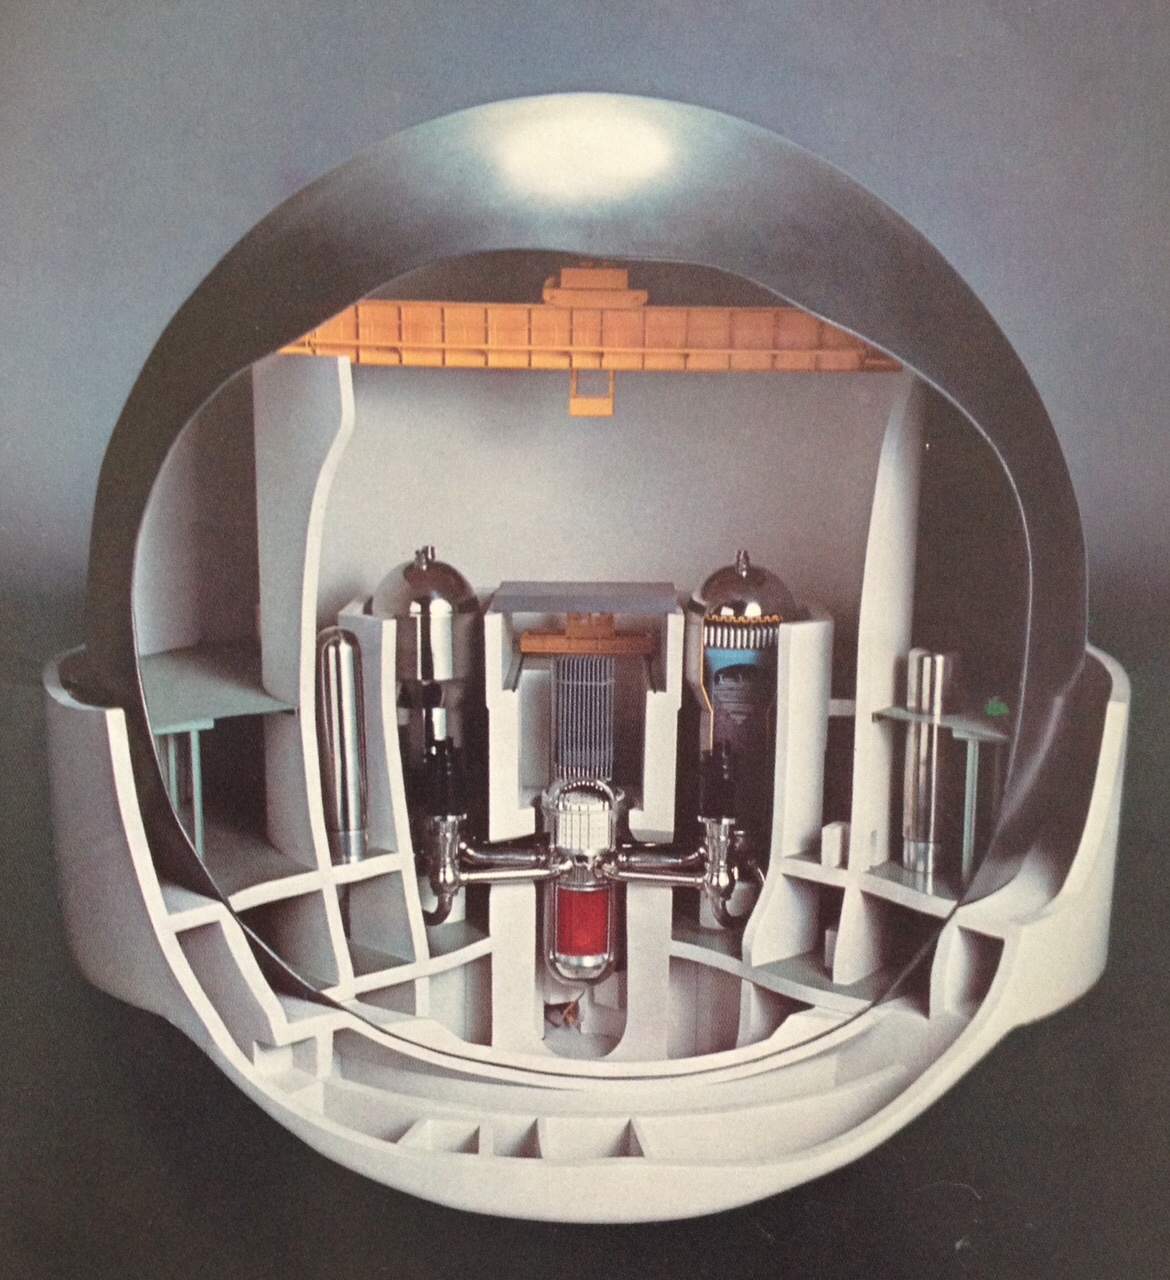 Combustion Engineering System 80 NSSS and standard spherical containment, from C-E Power Systems ad in author's collection.